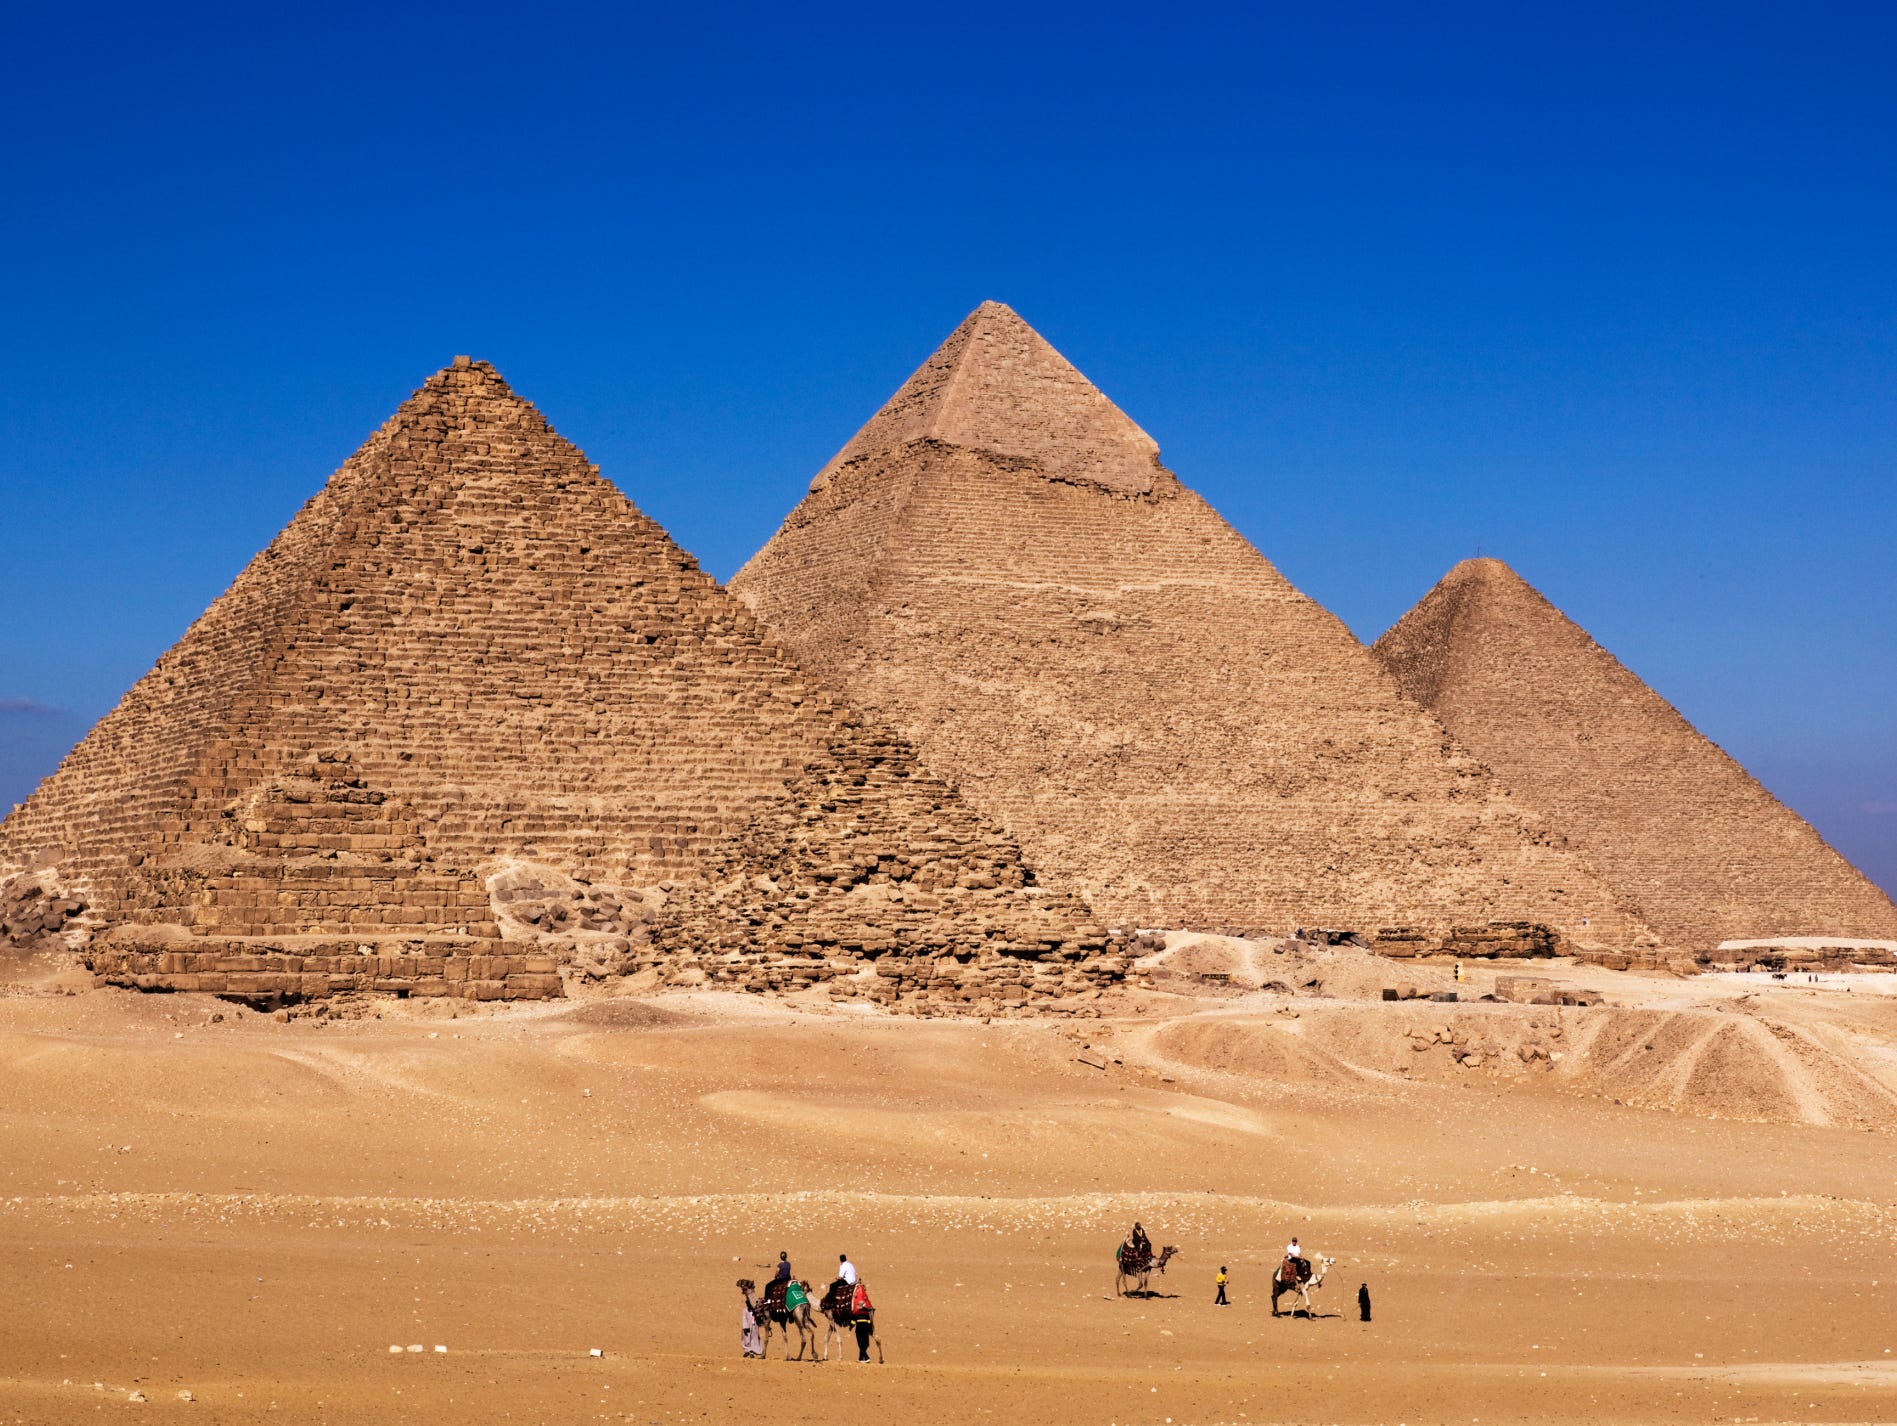 The mission to look inside the pyramids at Giza begins in November 2015 and should last until late 2016.